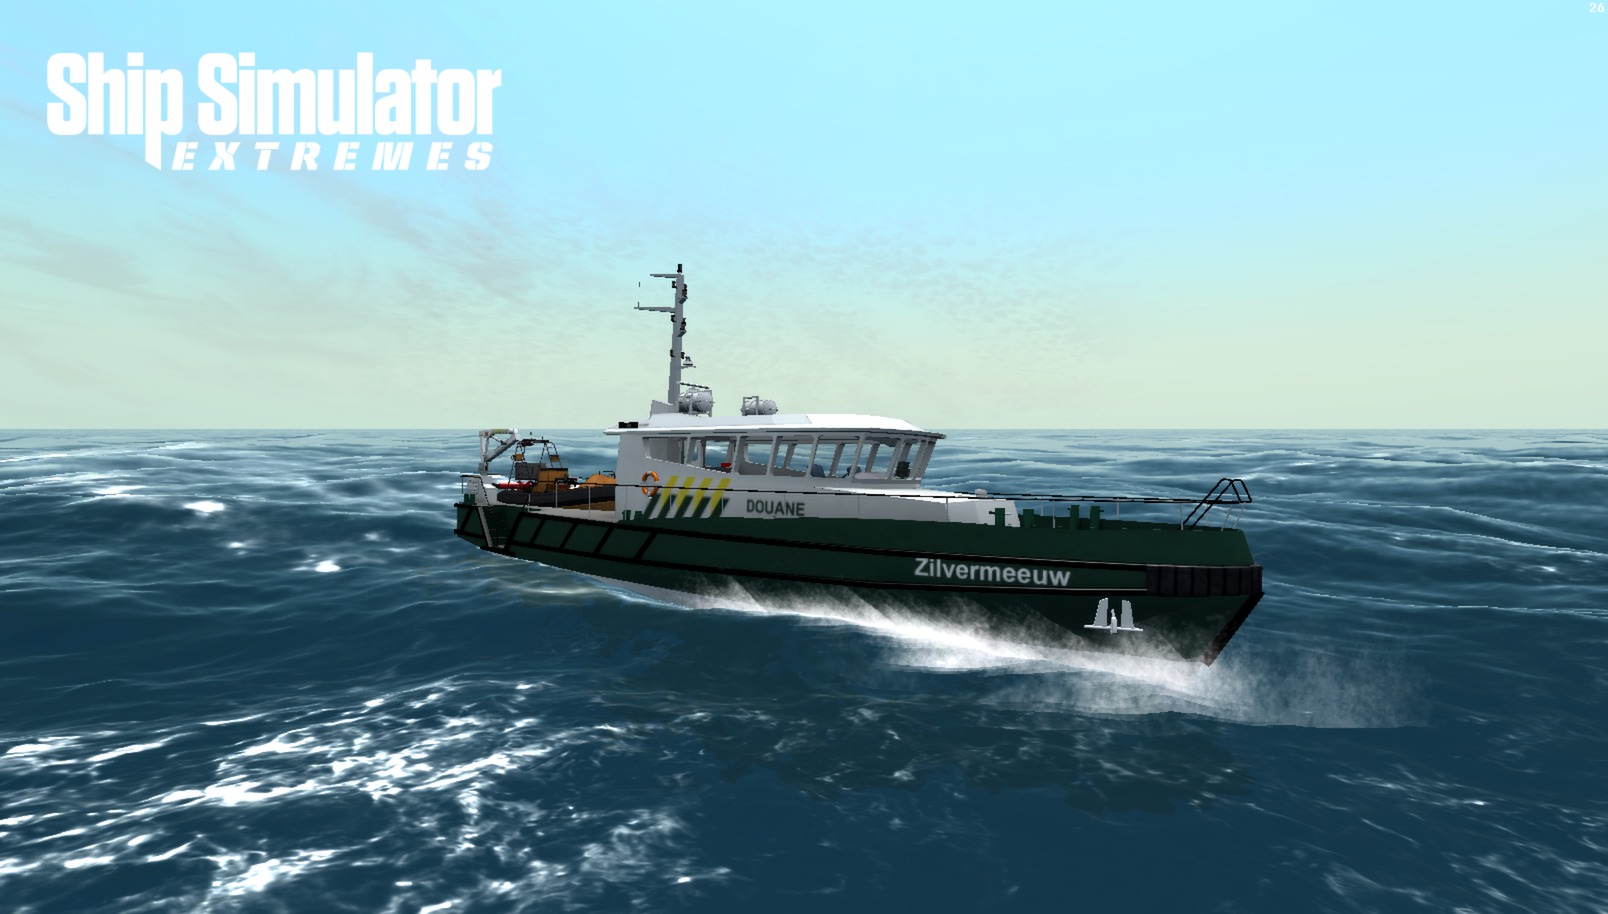 Find the best computers for Ship Simulator Extremes